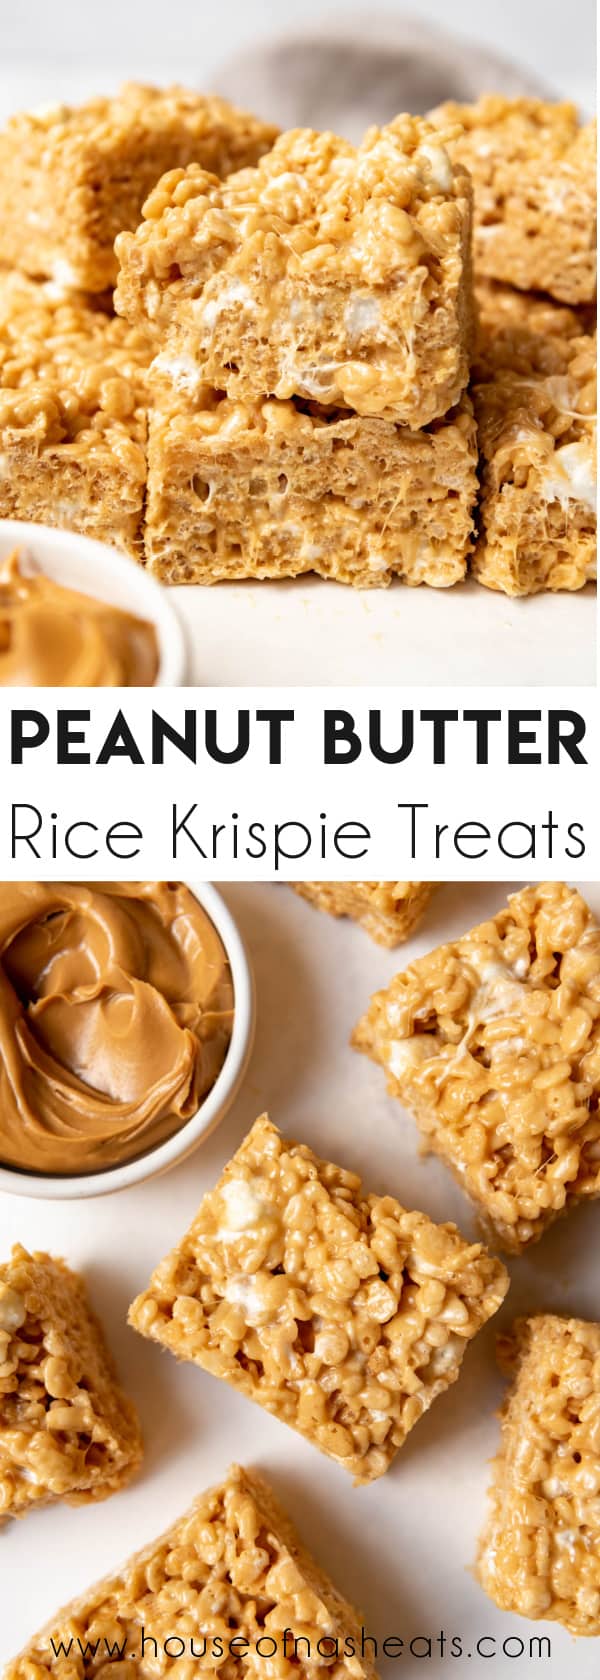 A collage of images of peanut butter rice krispy treats with text overlay.